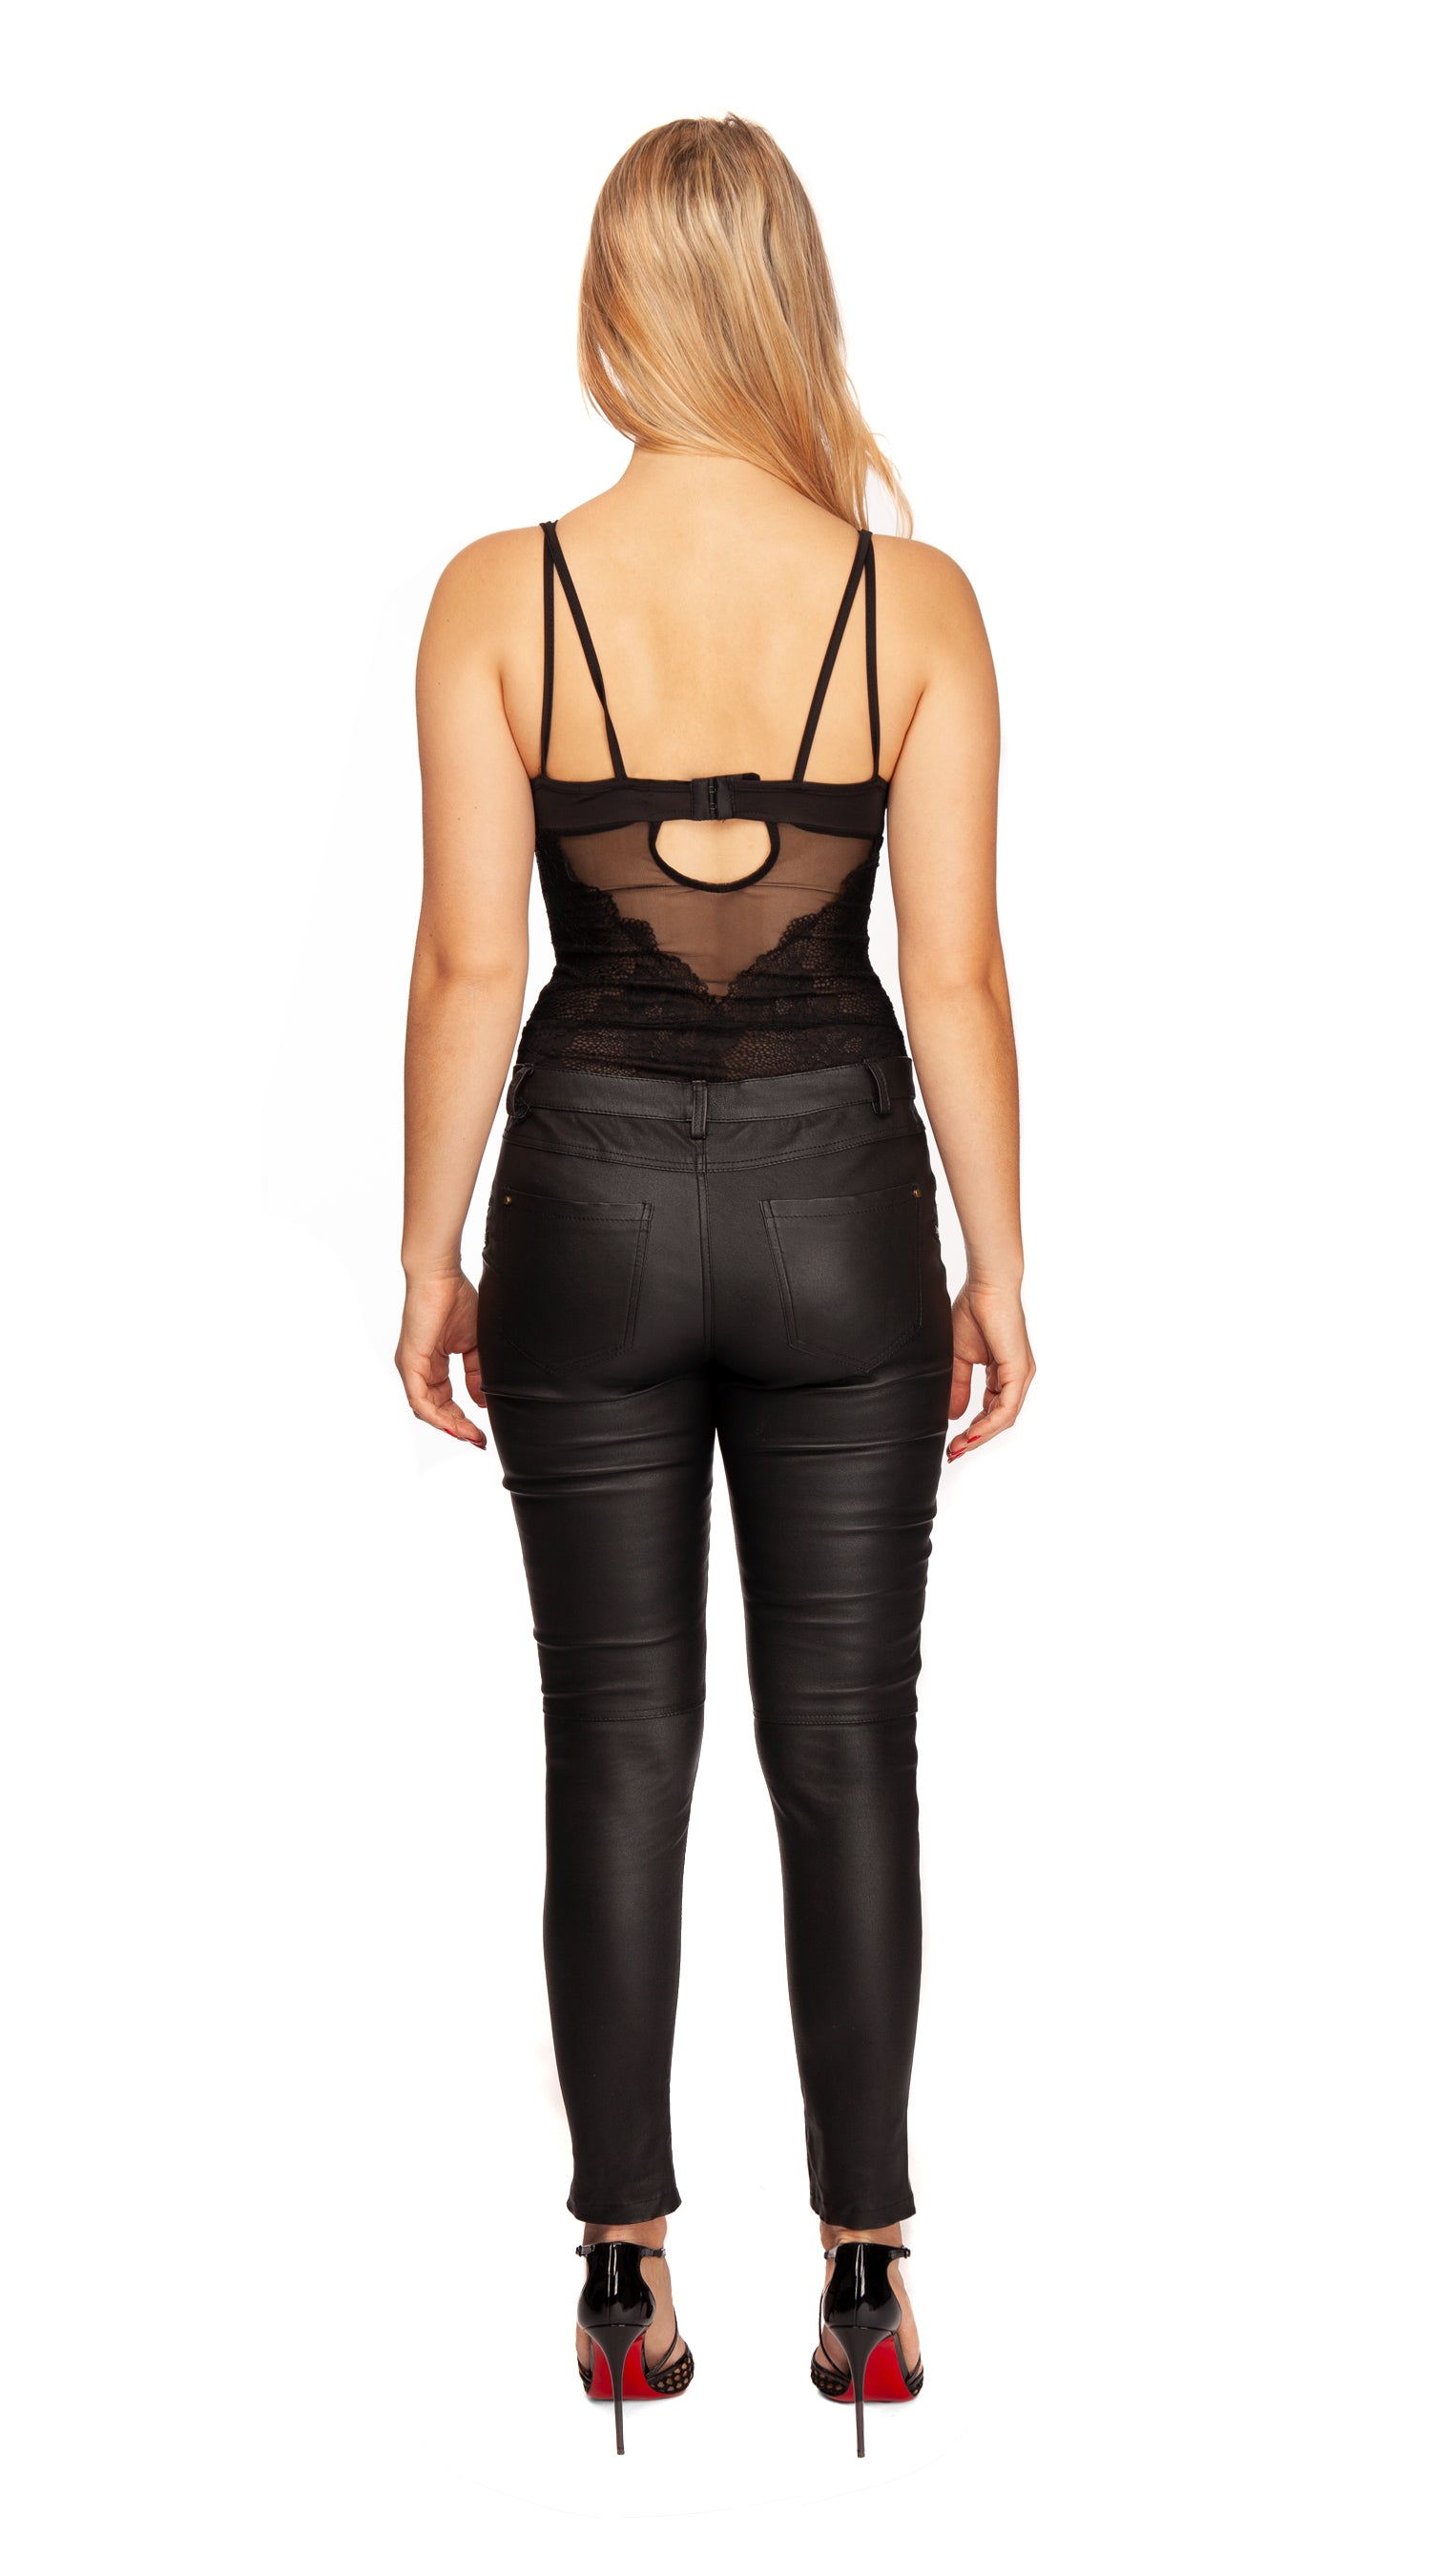 Luxy High Waisted Leather Pants